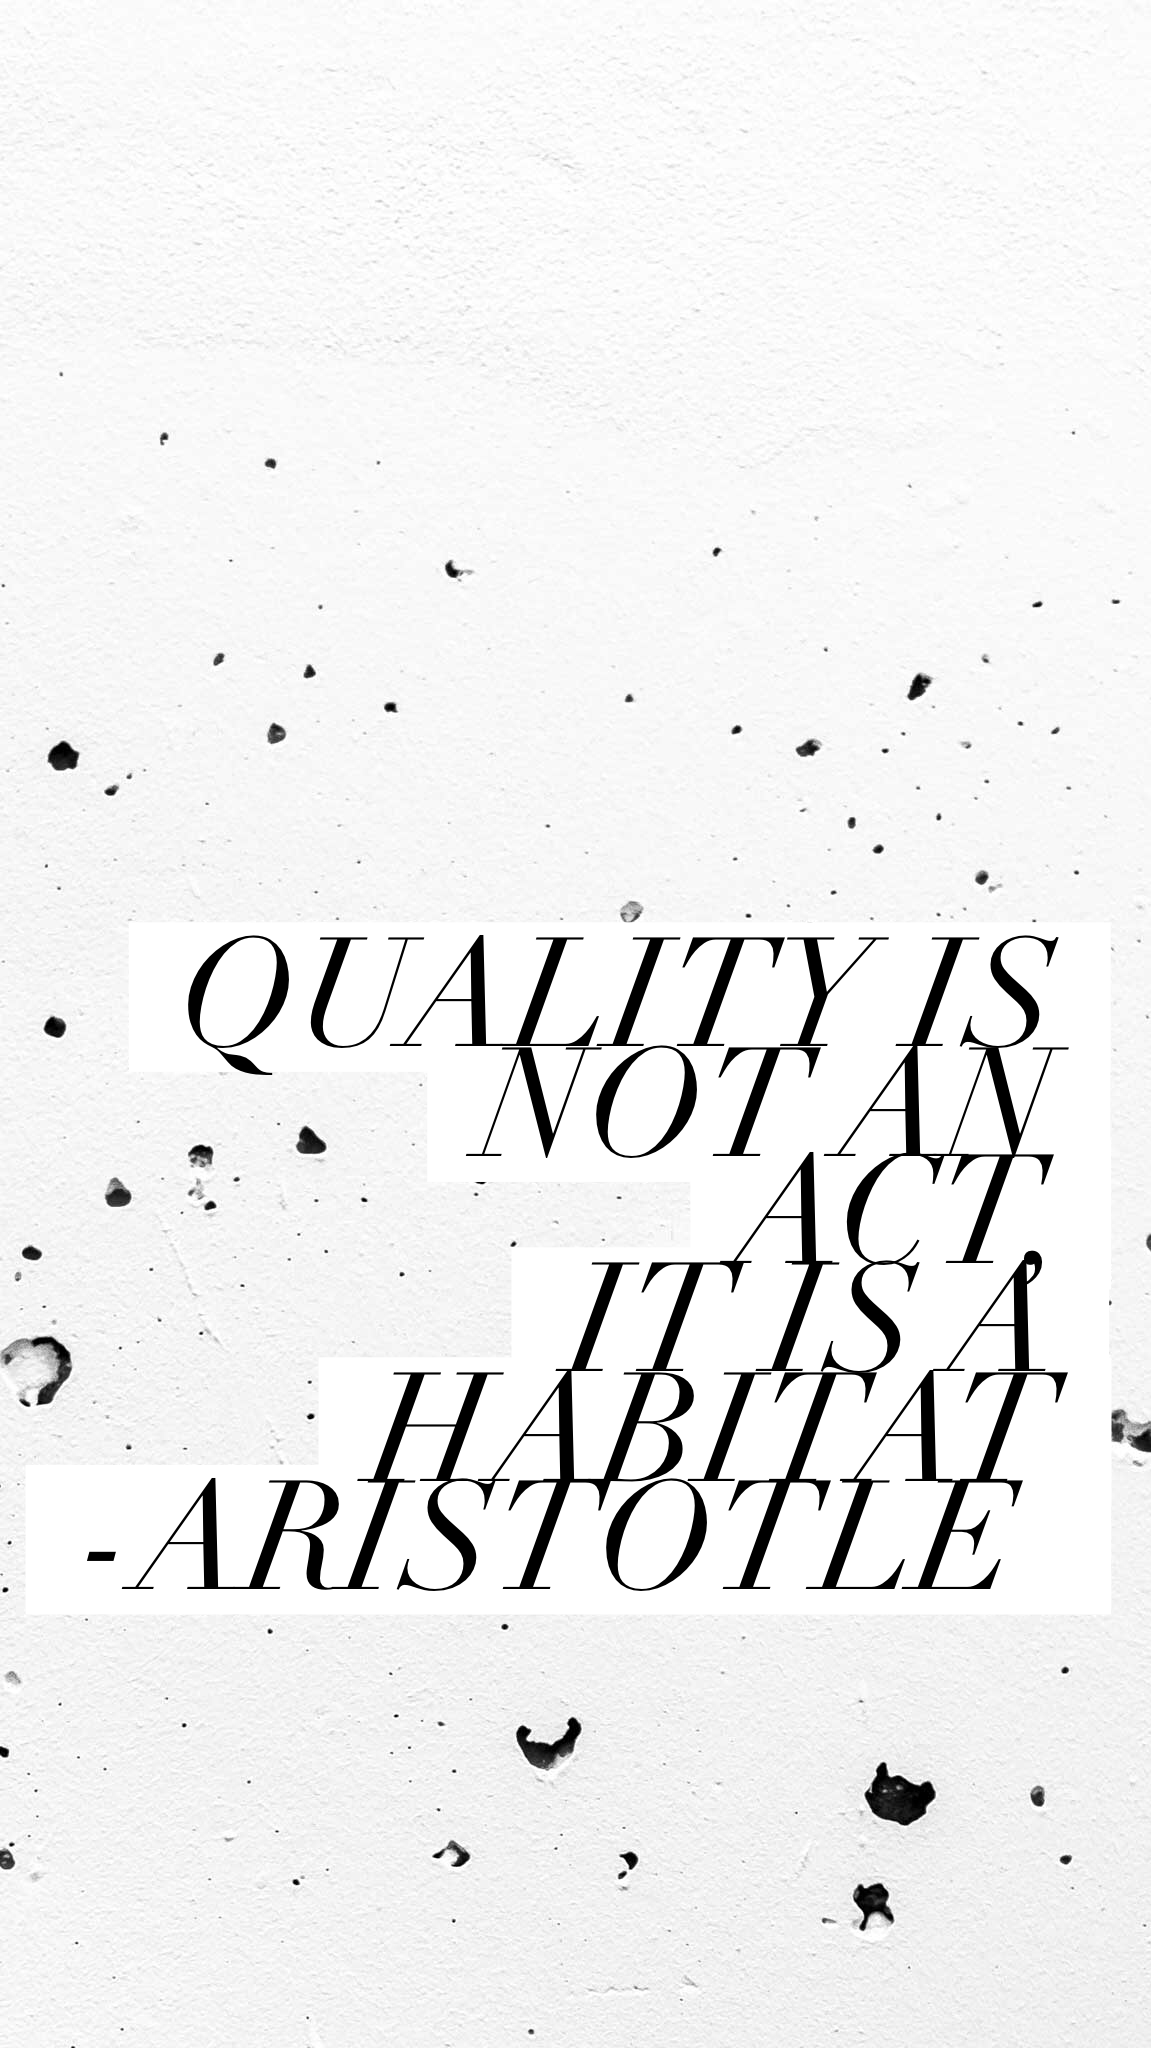 The Style Aesthetic | Inspirations Quotes Blog Post | NZ Lifestyle Blog